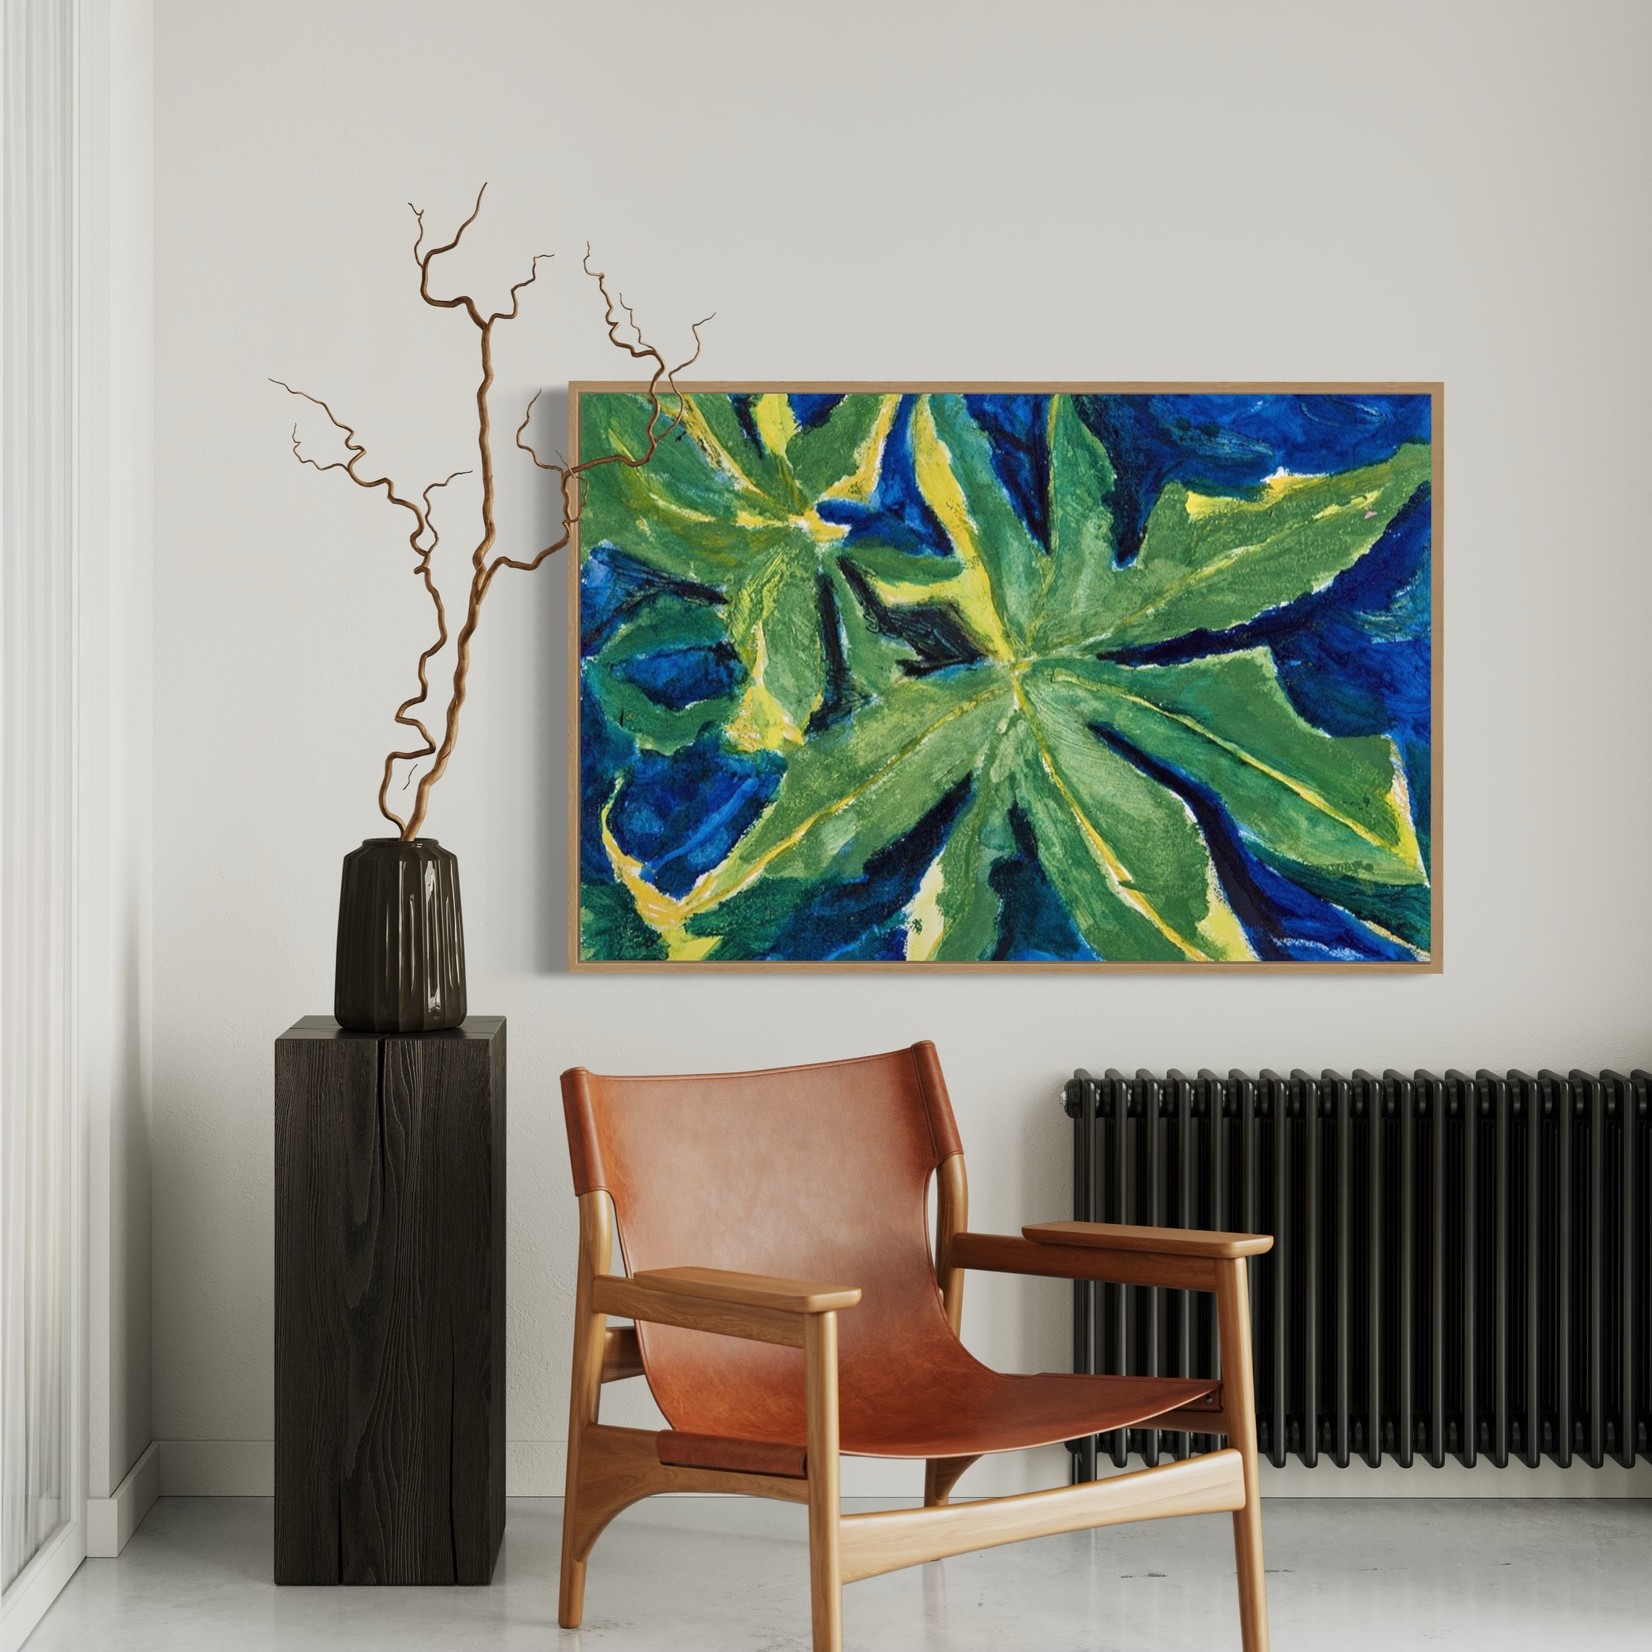 Stretched Print on Canvas Nature Studies 2 Canvas by Evelyn Ogly